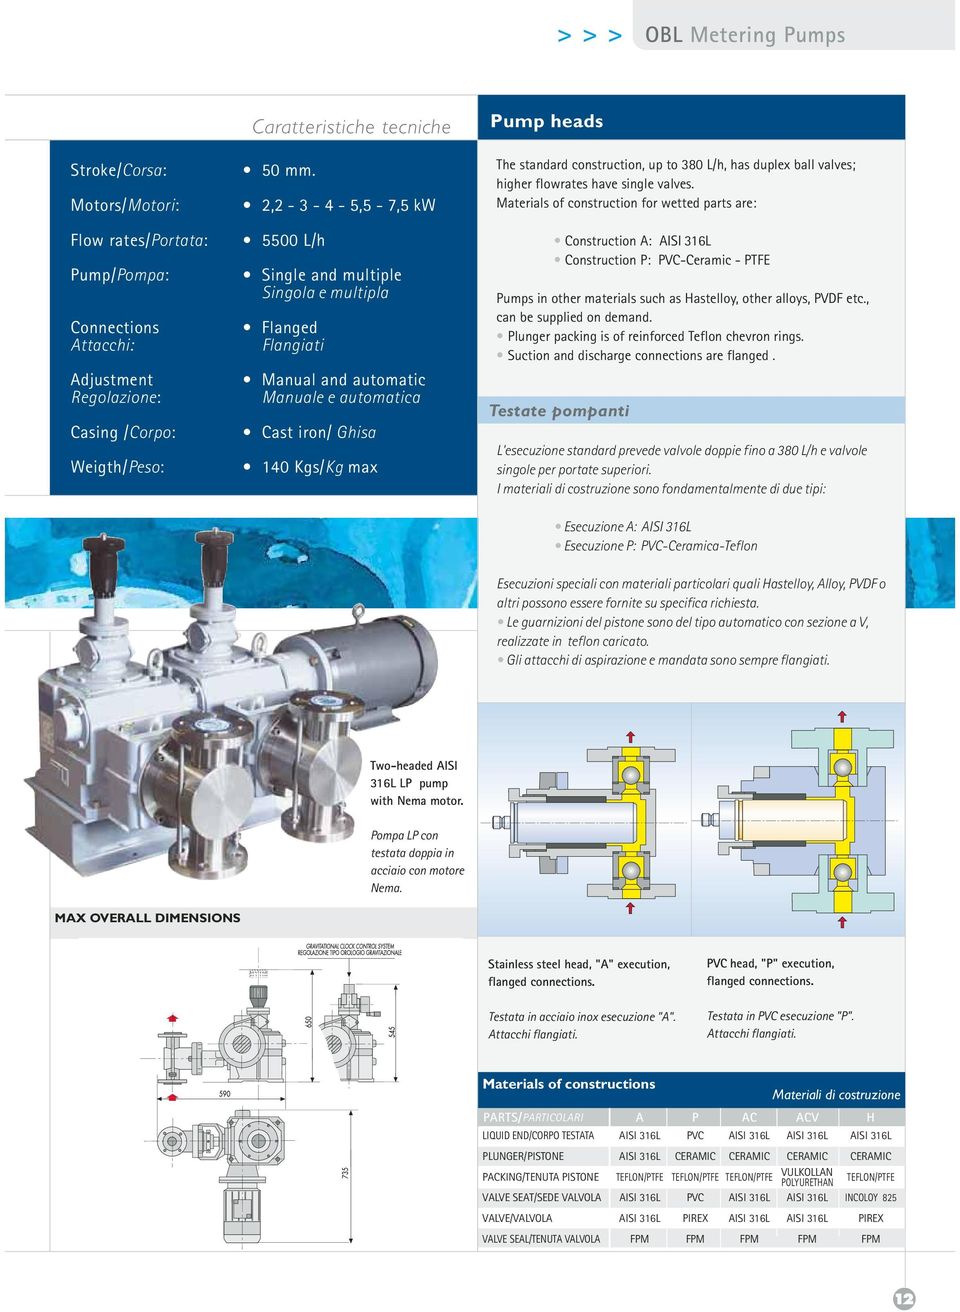 and automatic Regolazione: Manuale e automatica Casing /Corpo: Cast iron/ Ghisa Weigth/Peso: 140 Kgs/Kg max Pump heads The standard construction, up to 380 L/h, has duplex ball valves; higher